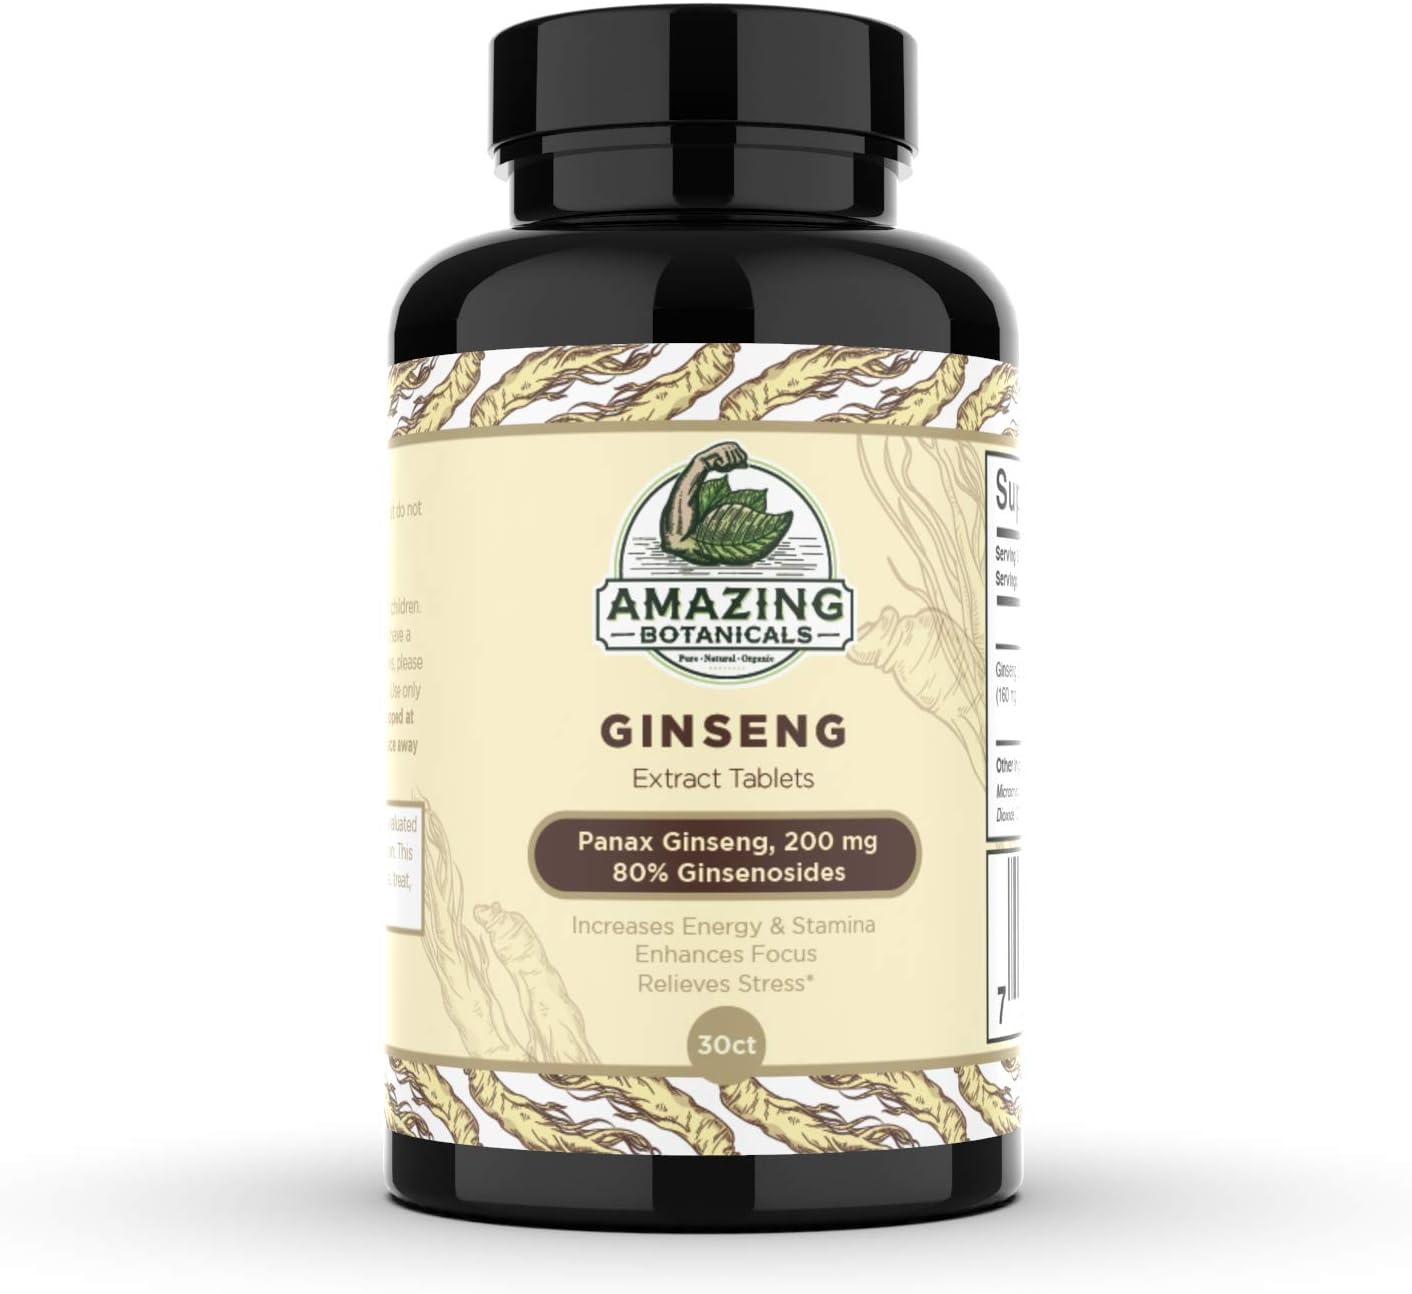 Amazing Botanicals Panax Ginseng Extract Tablets - 200m